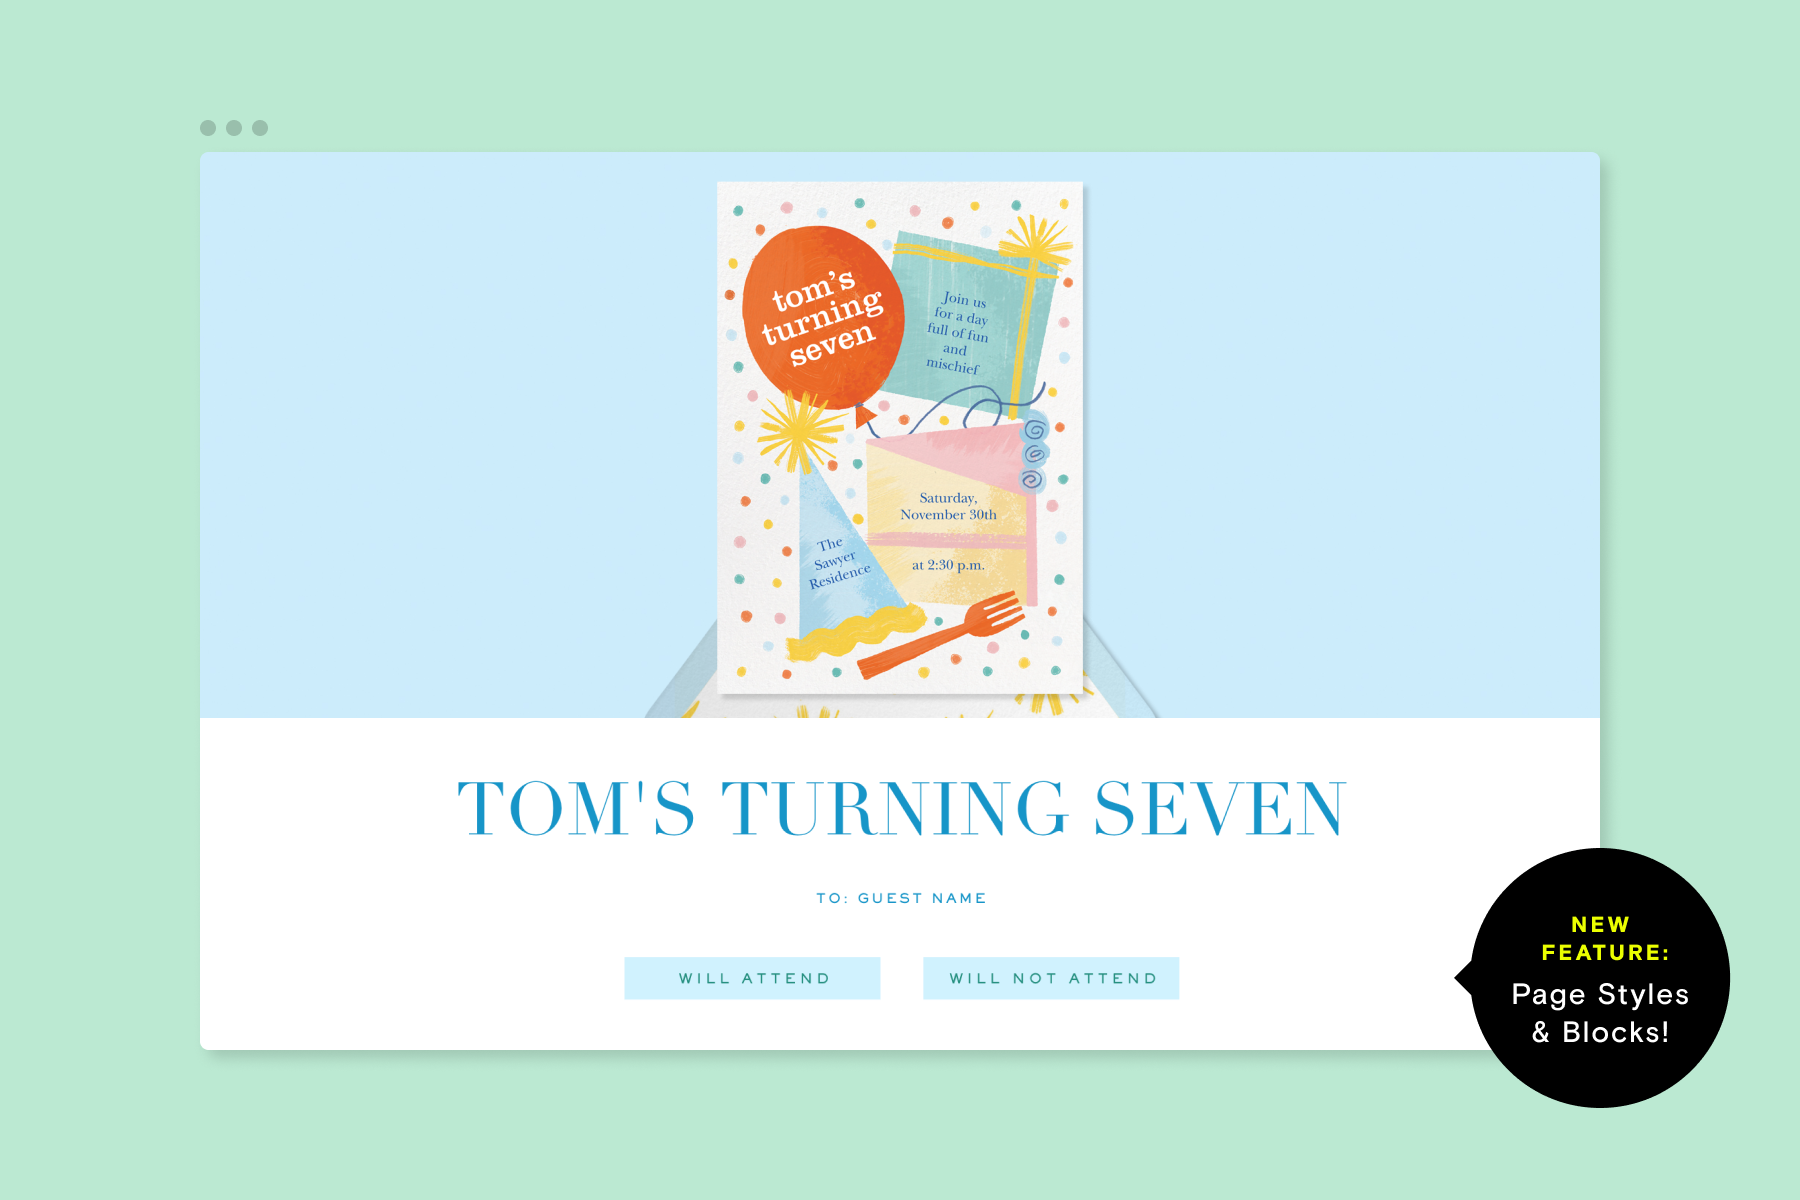 A kid’s birthday invitation and event title that reads “Tom’s Turning Seven.” The invitation has an illustration of a birthday hat, cake, and a present.